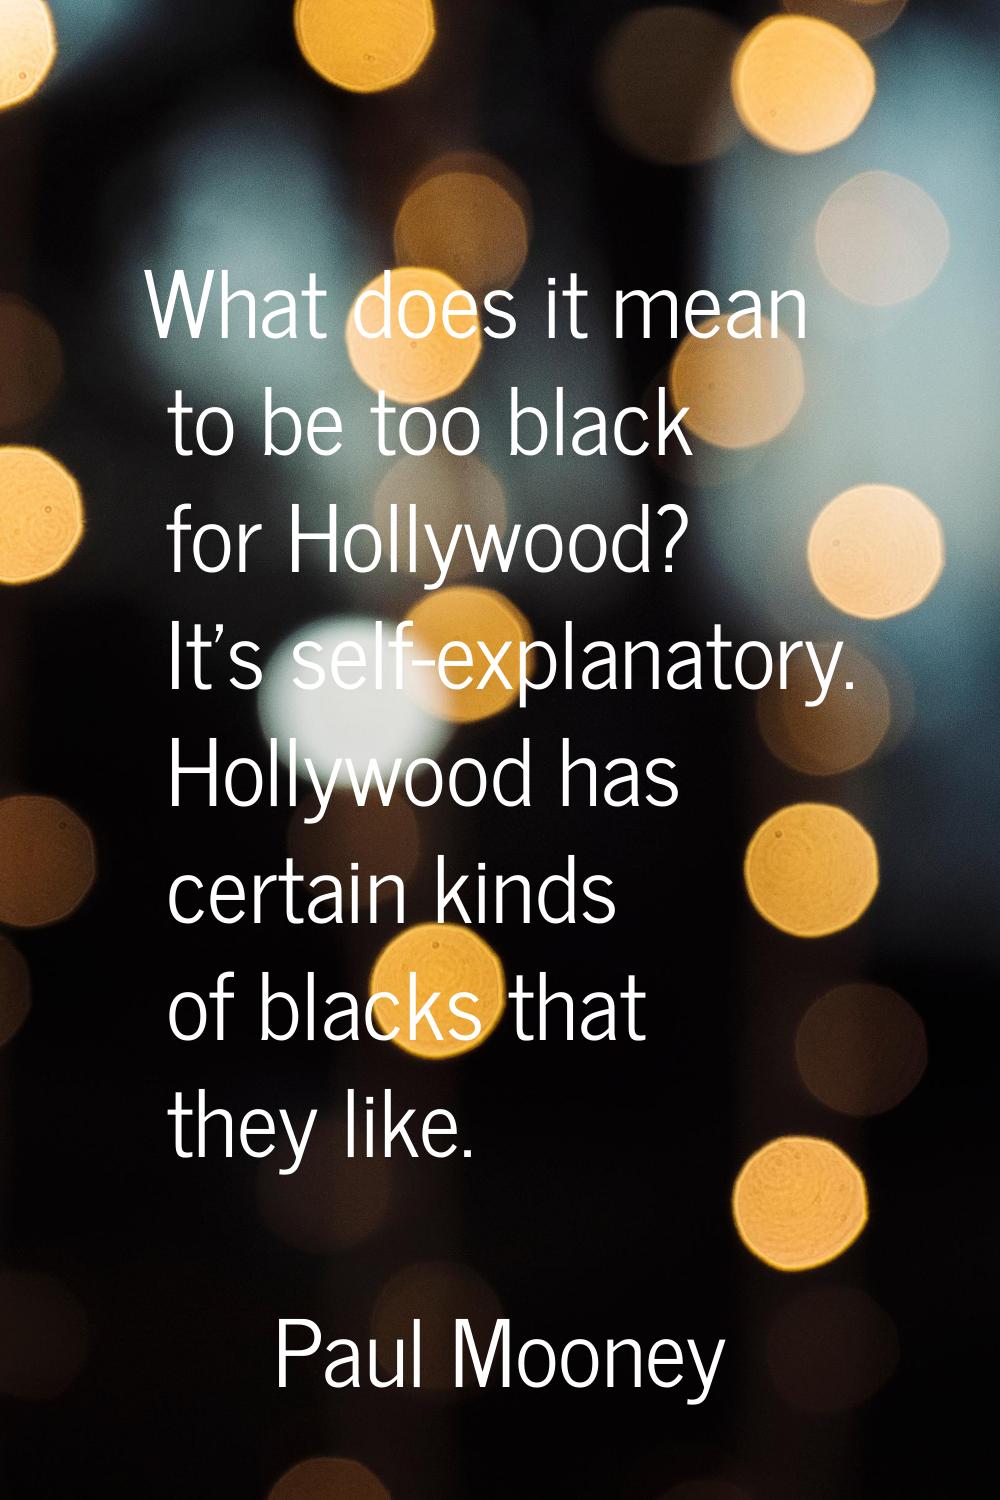 What does it mean to be too black for Hollywood? It's self-explanatory. Hollywood has certain kinds